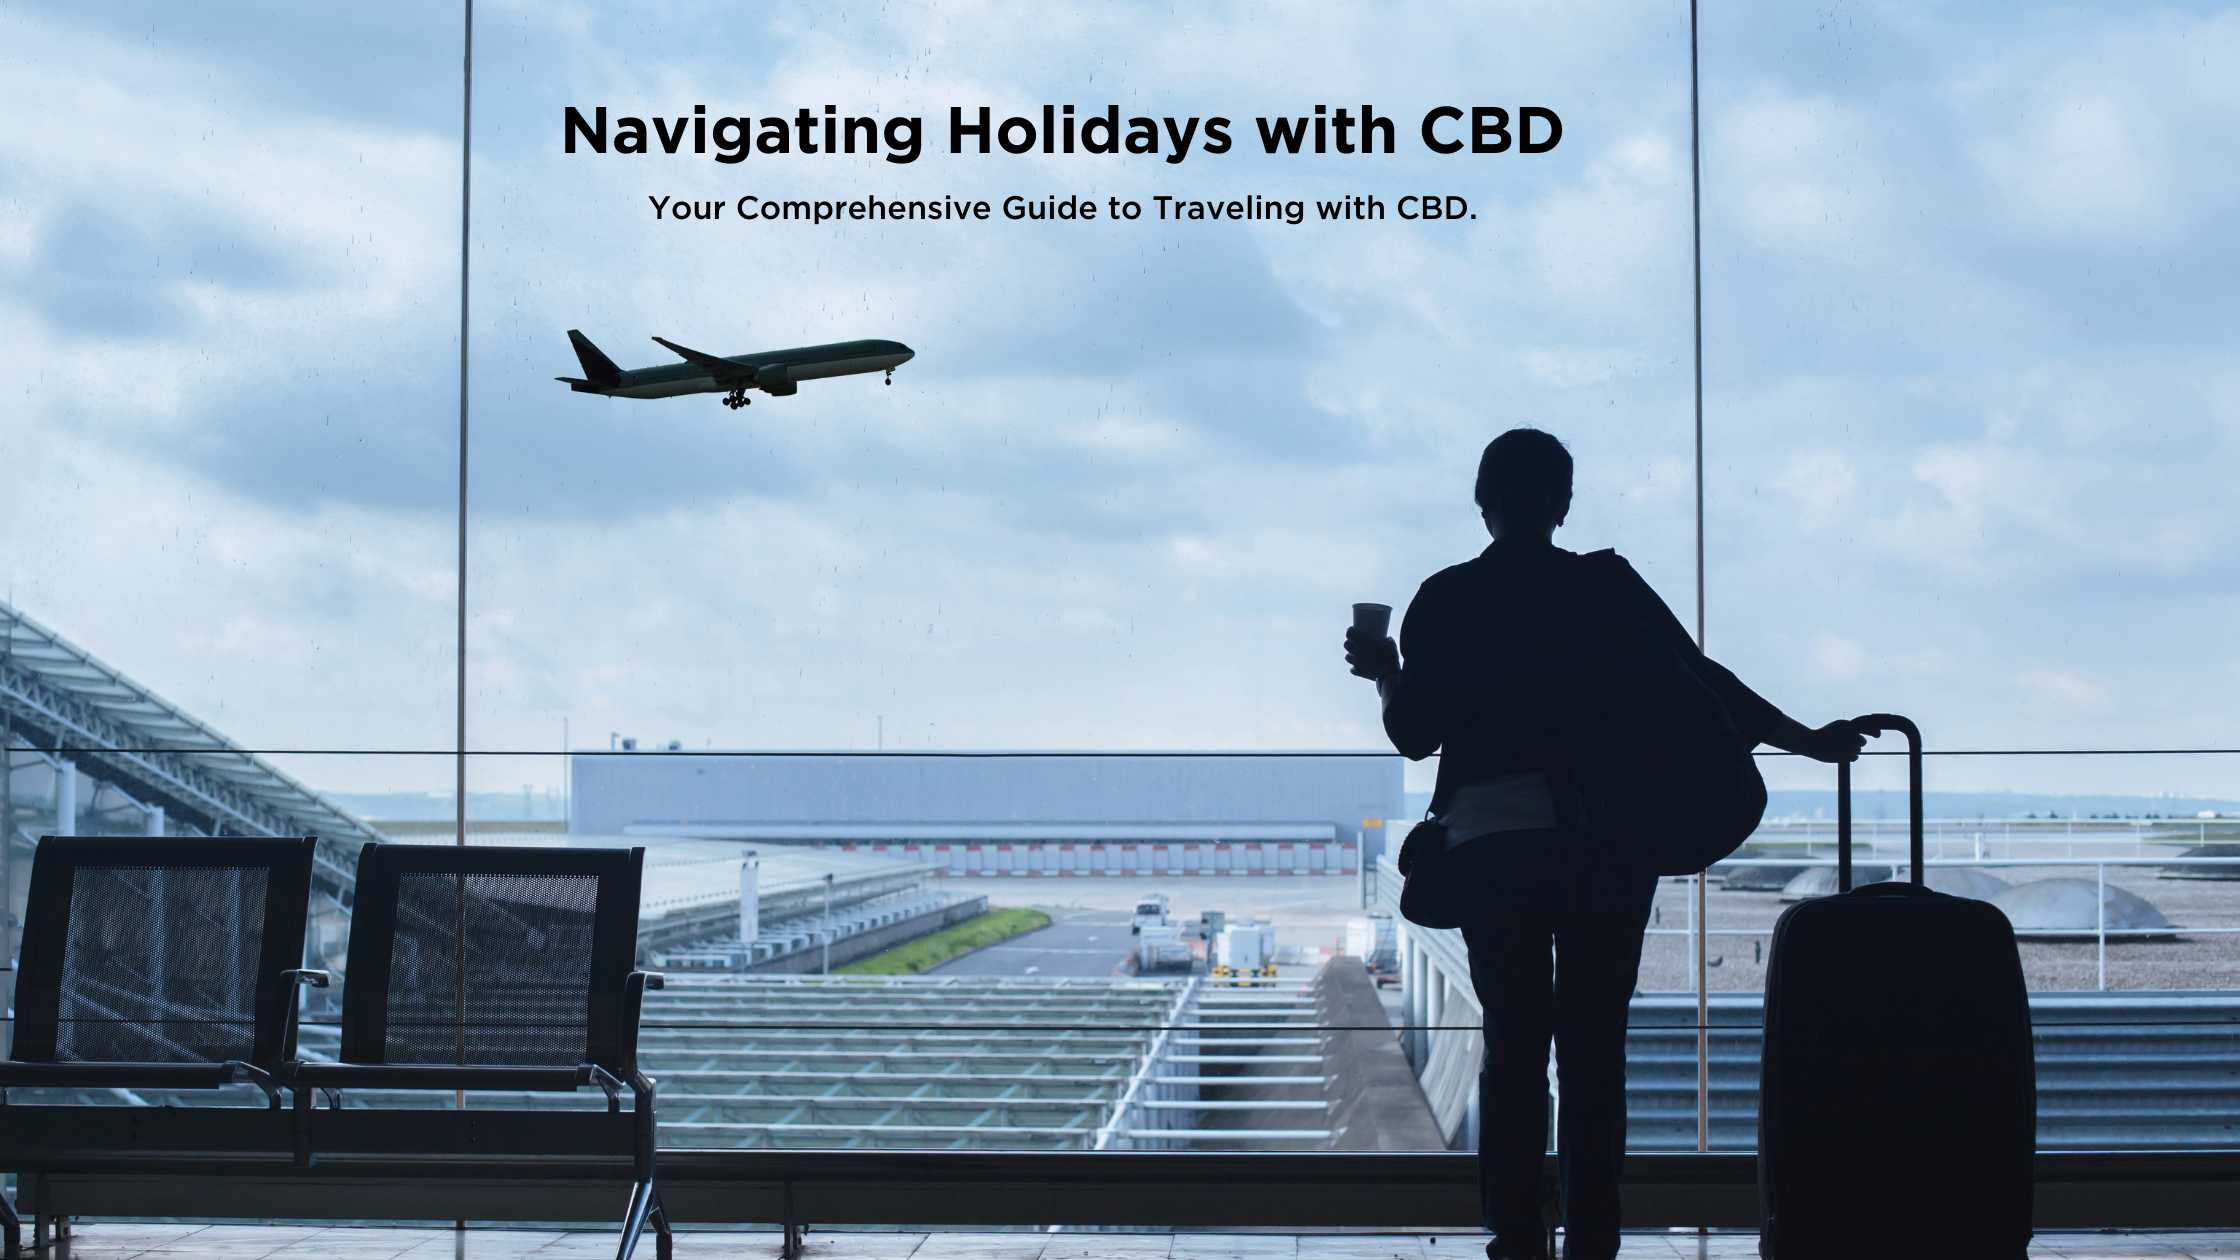 An airplane in flight with overlay text reading "Navigating Holidays with CBD," representing the ease of traveling with CBD during the holiday season.